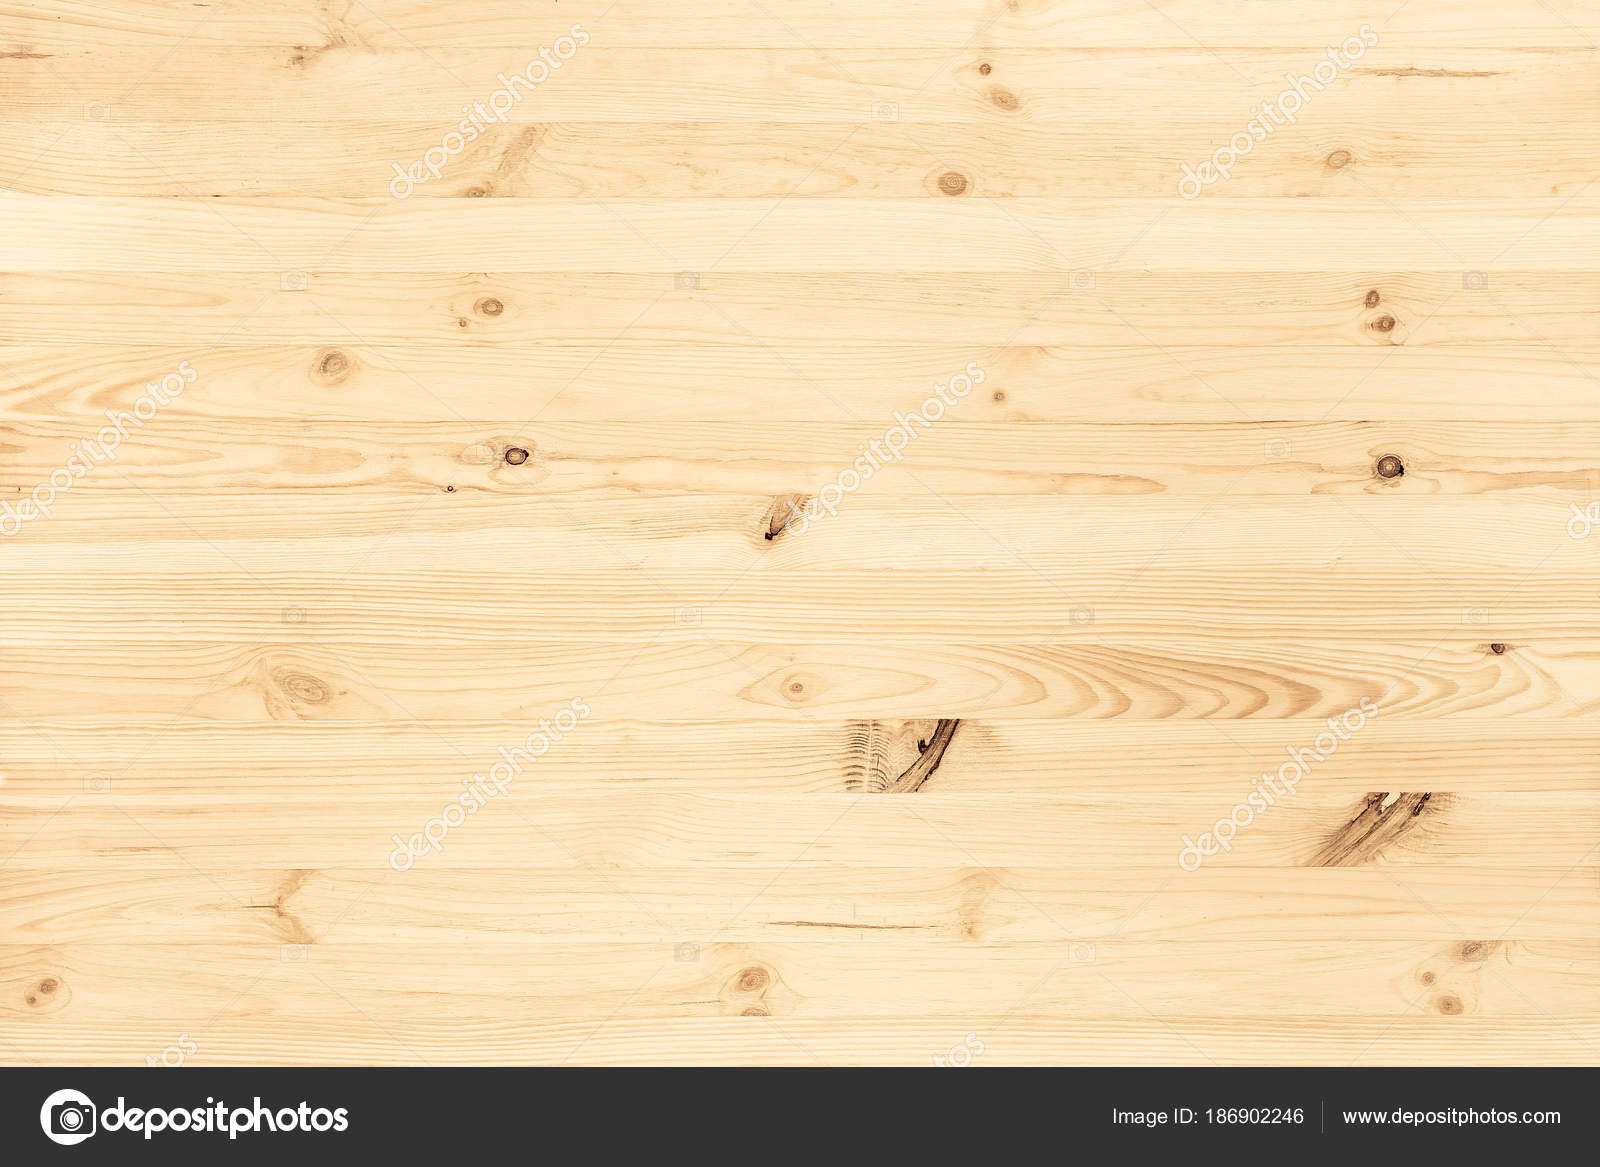 wood texture background, natural wooden texture background